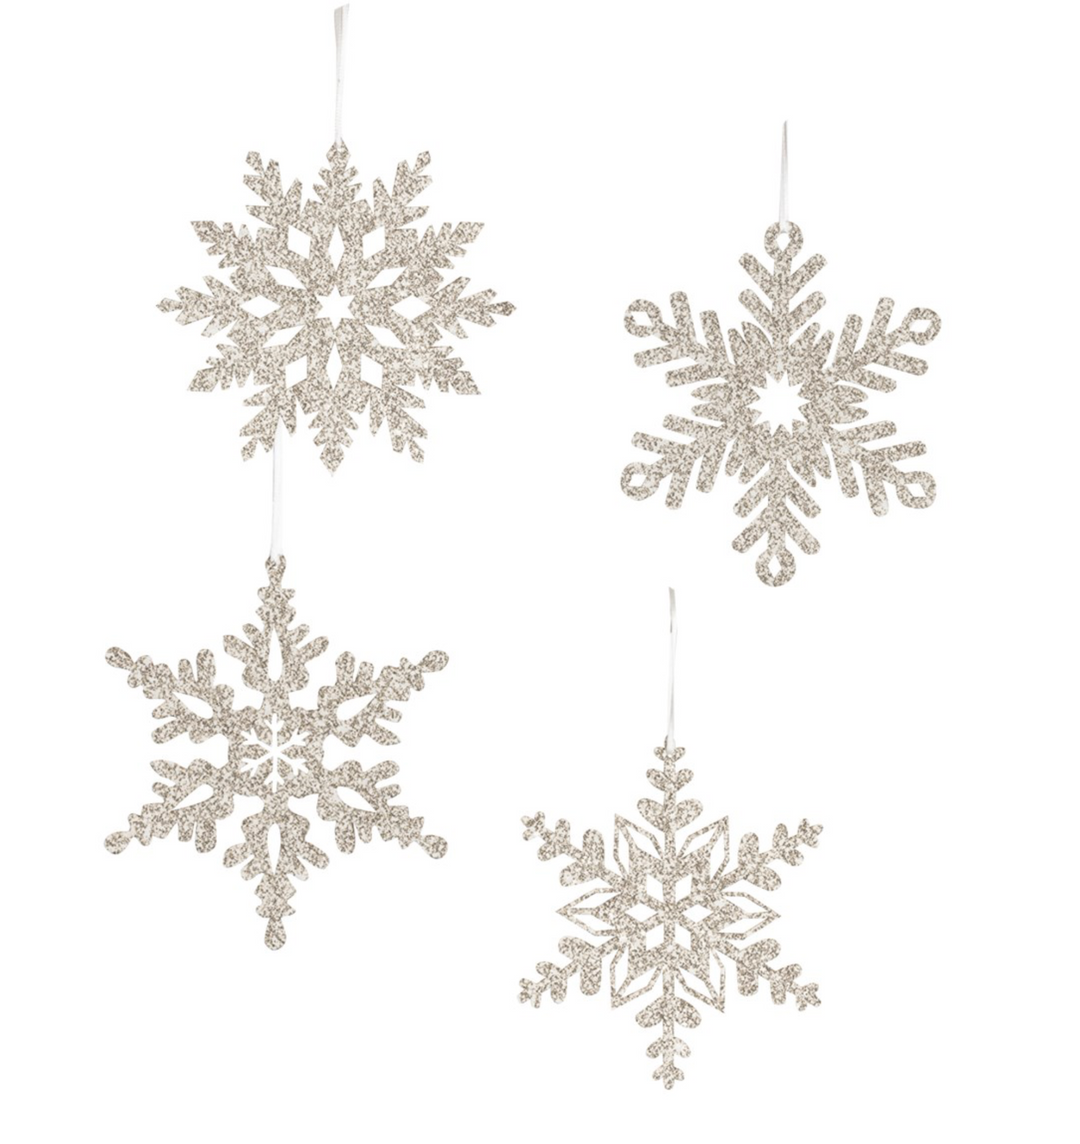 Small Glittered Snowflakes